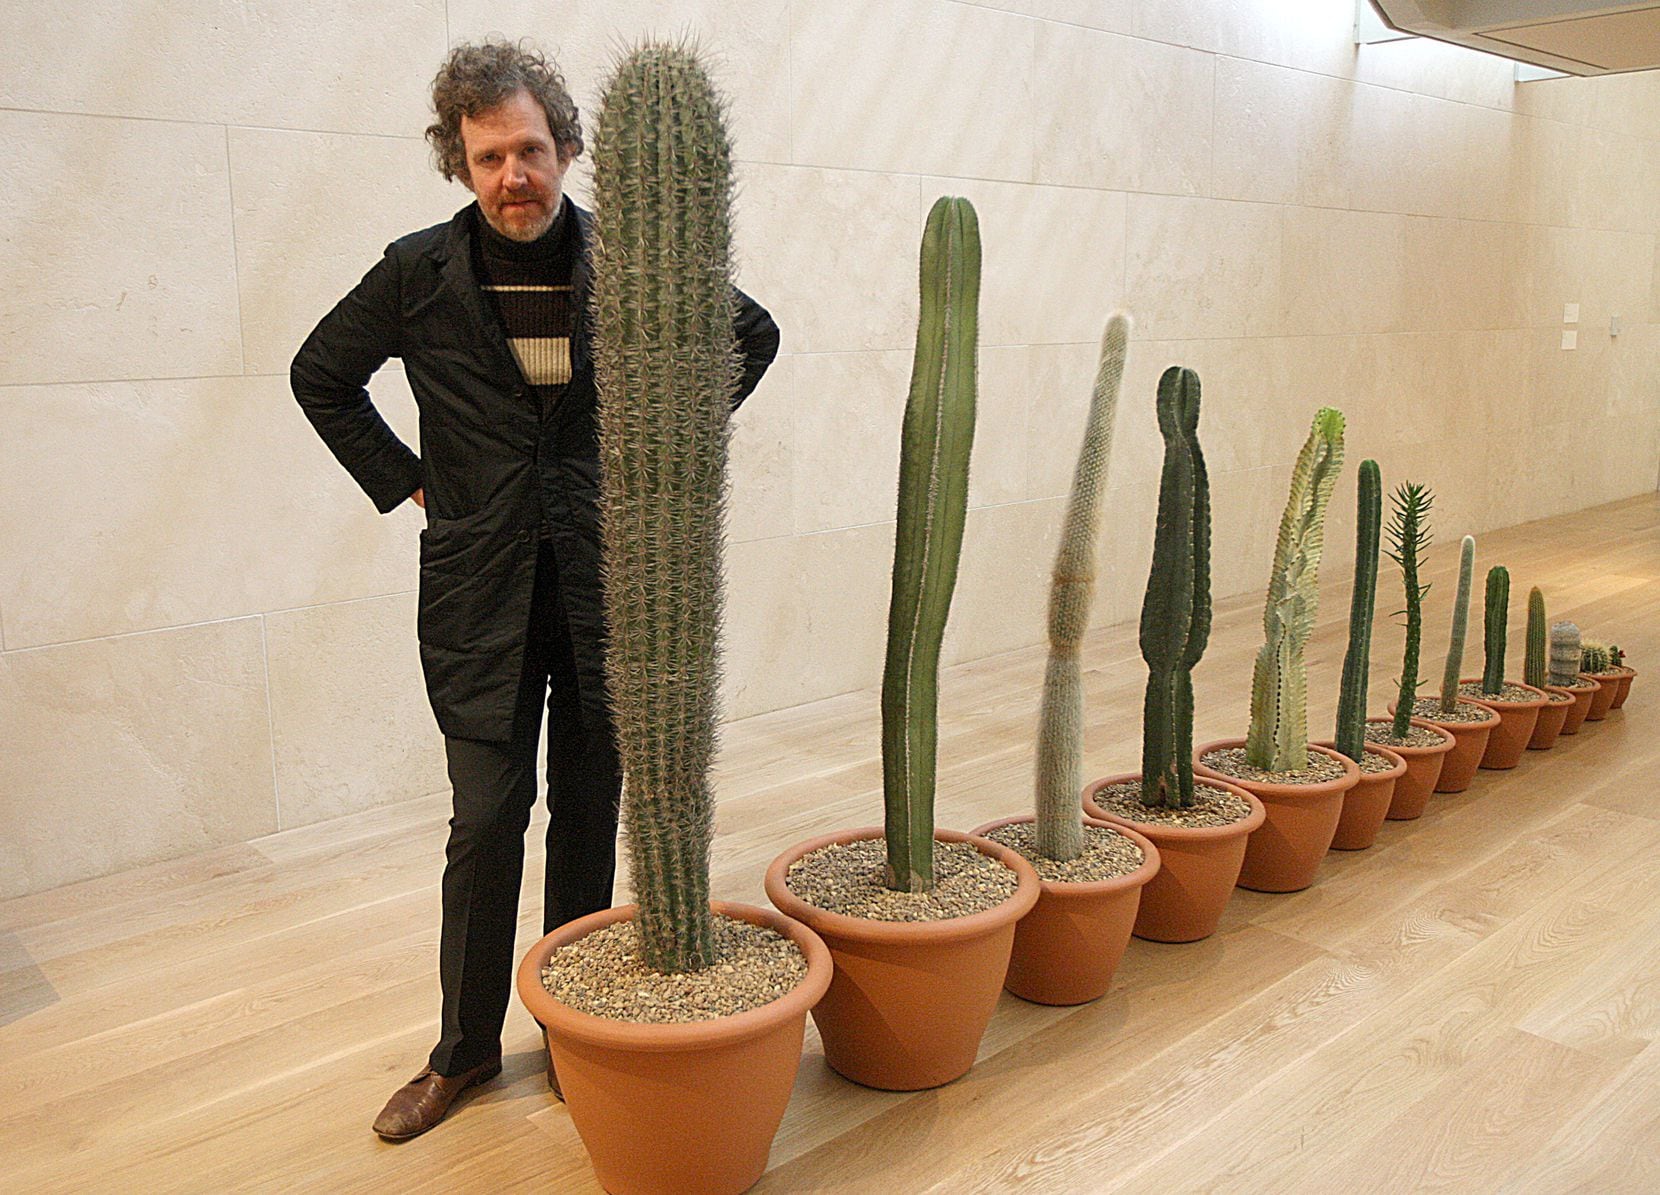 Martin Creed, shown here at the Nasher Sculpture Center in 2011, is best known as a visual artist, but he has also been writing and performing music for decades.